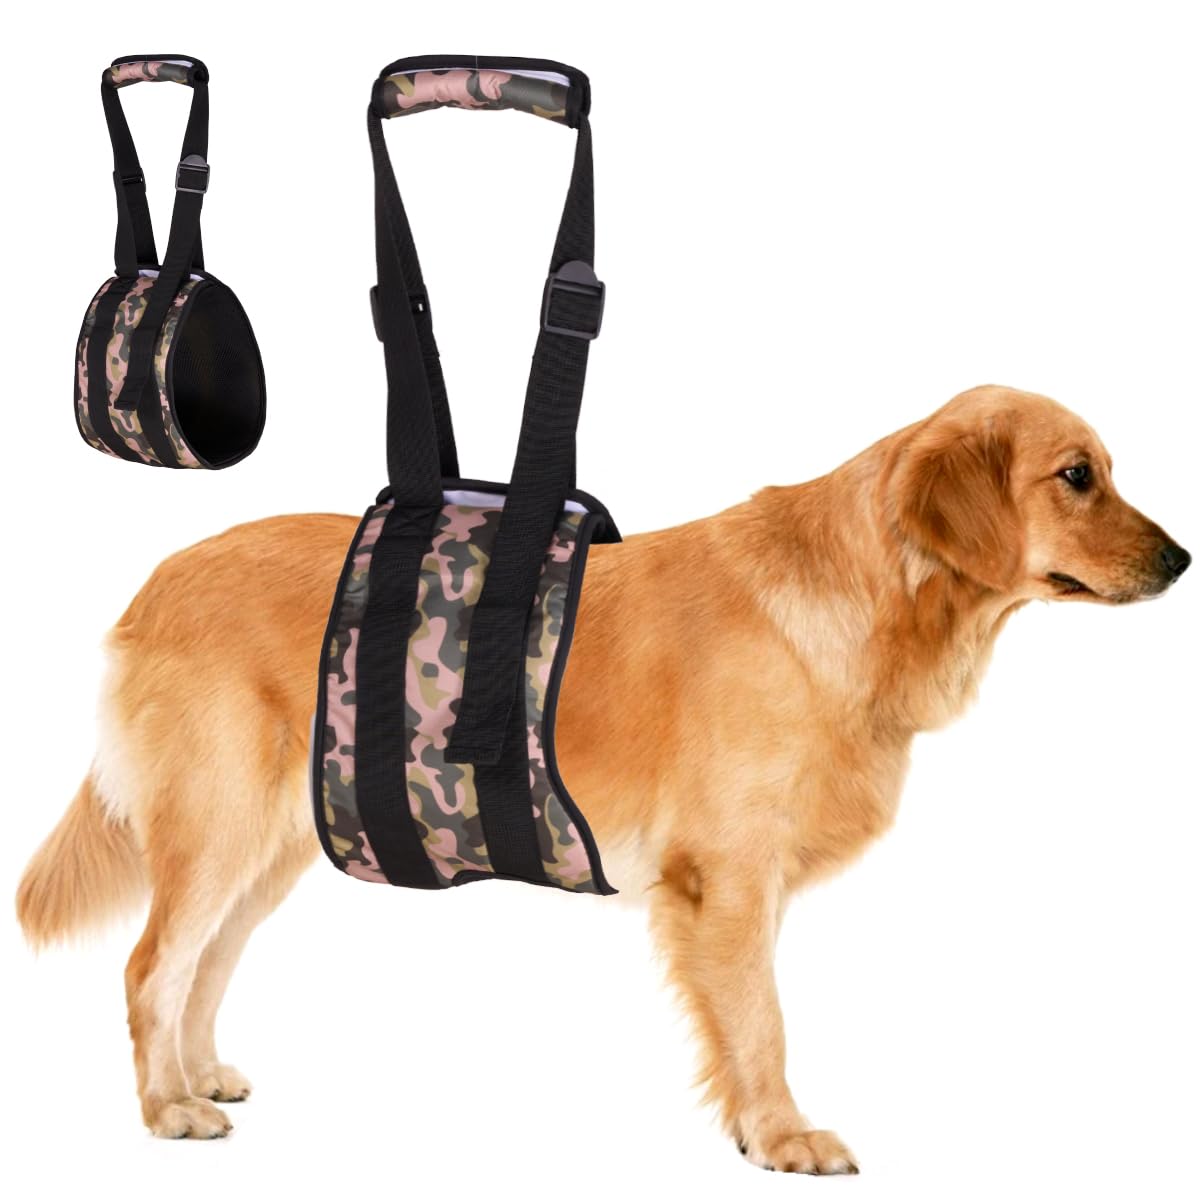 LovinPet Adjustable Dog Lift Harness for Weak Rear Legs|Portable and Comfortable Support Sling|Ideal for Senior,Injured,Disabled Dogs,and Post-ACL Surgery Recovery,Yellow